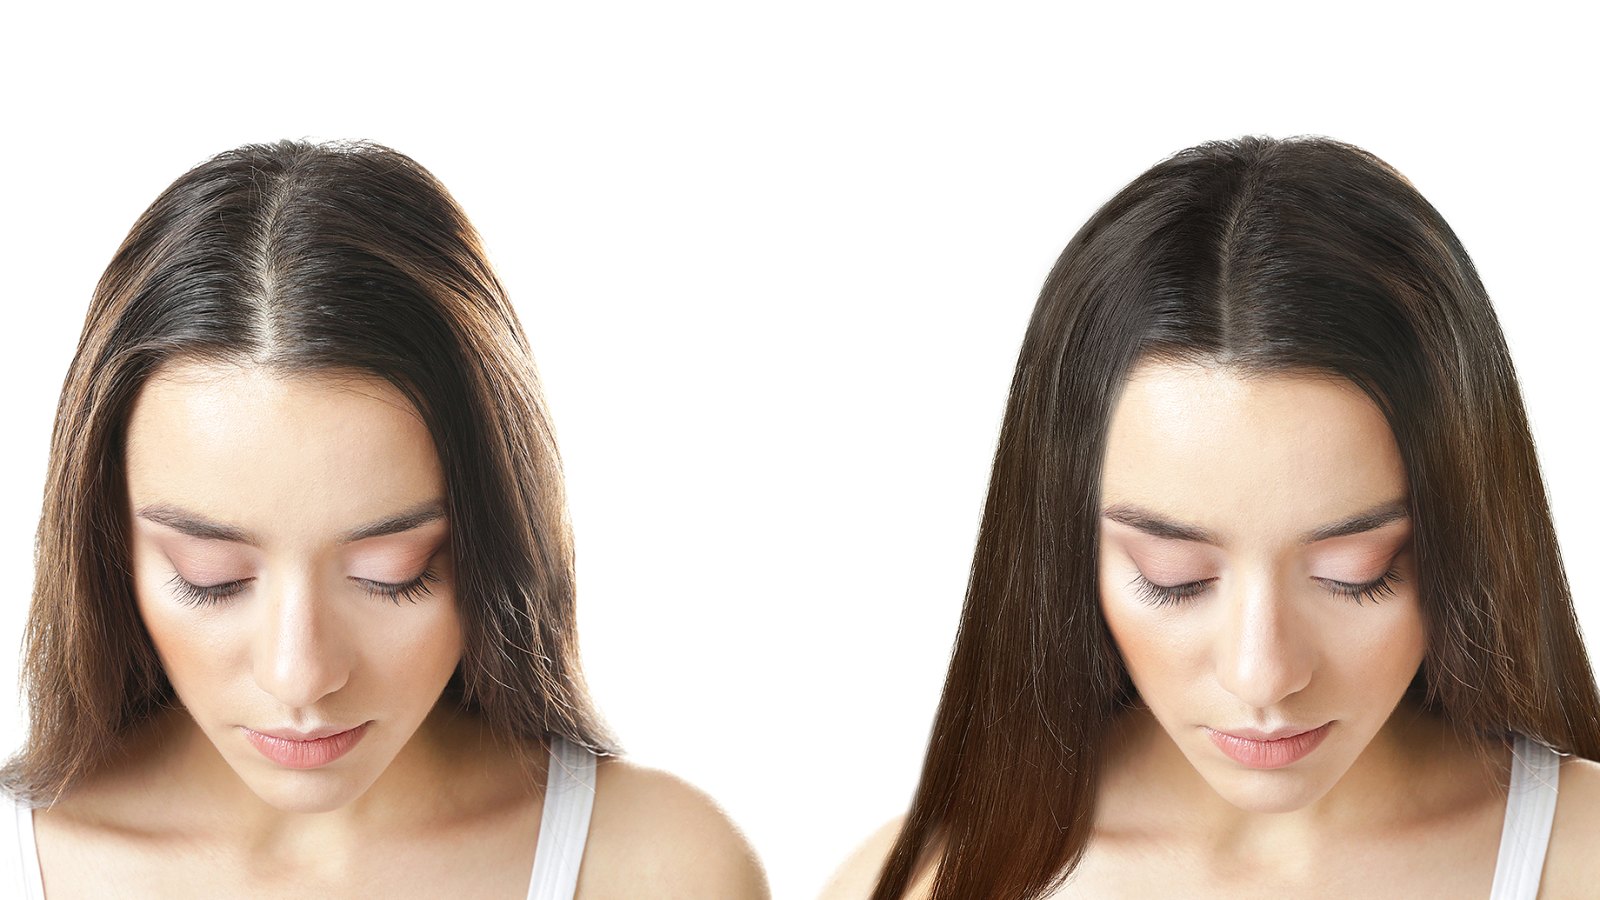 Living Proof Revitalizing Treatment Is Amazing for Thinning Hair